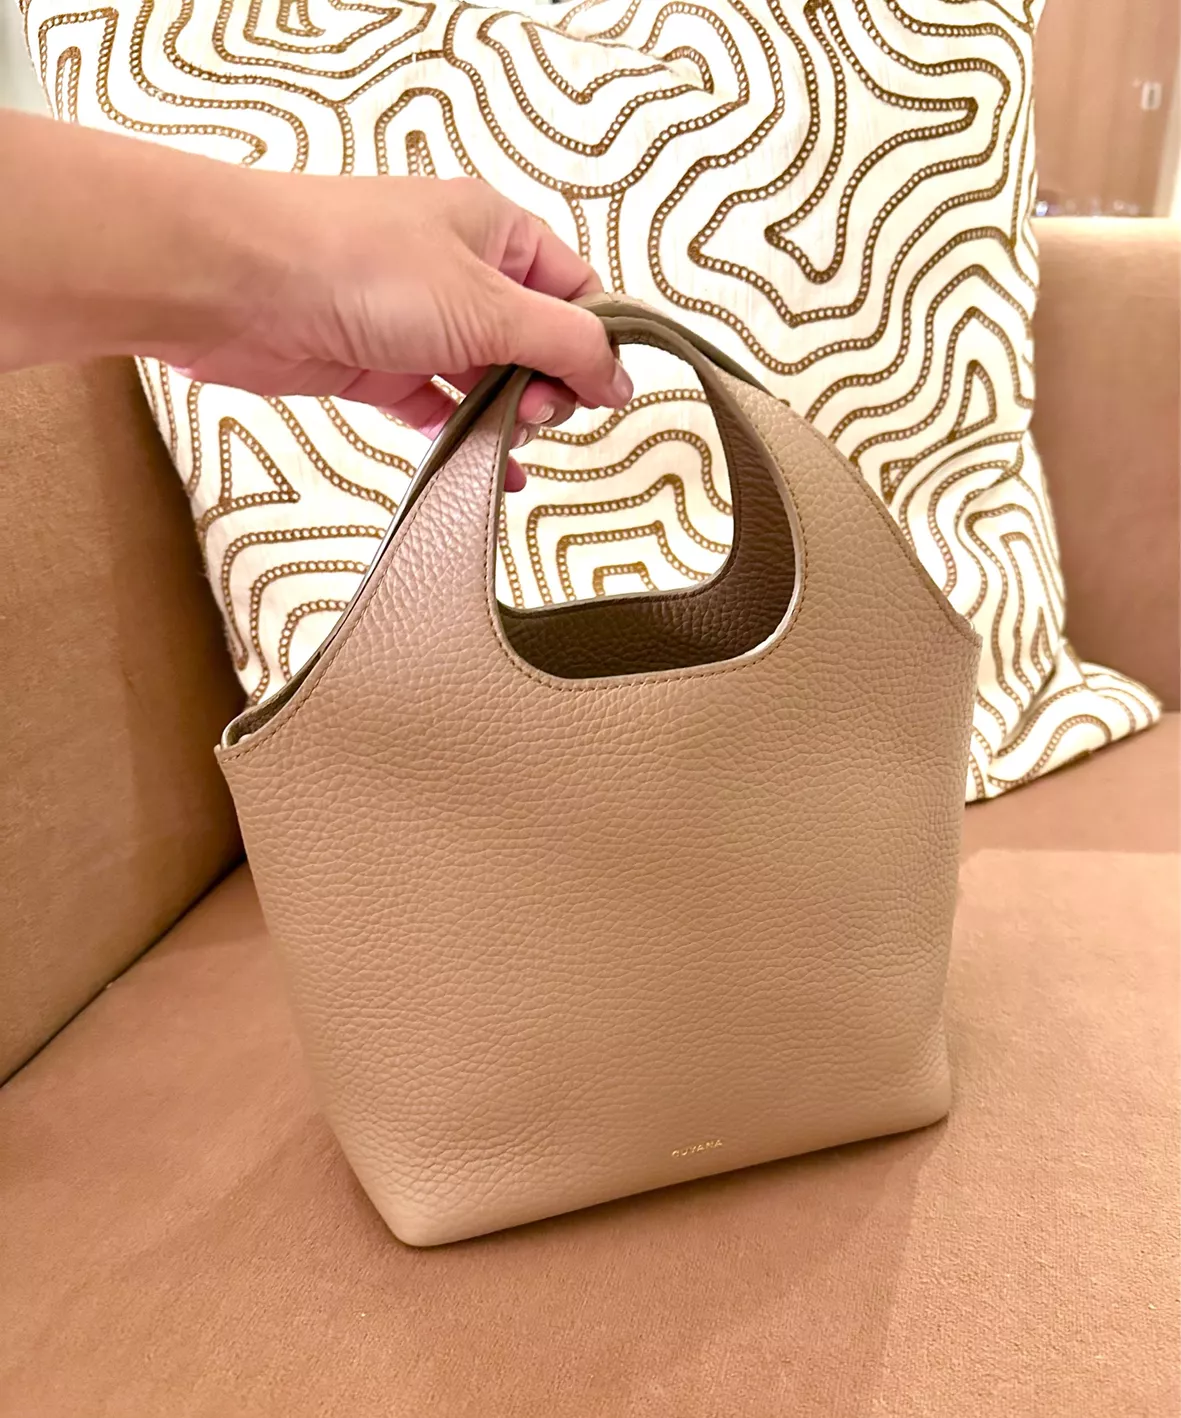 Cuyana Mini System Tote Review 